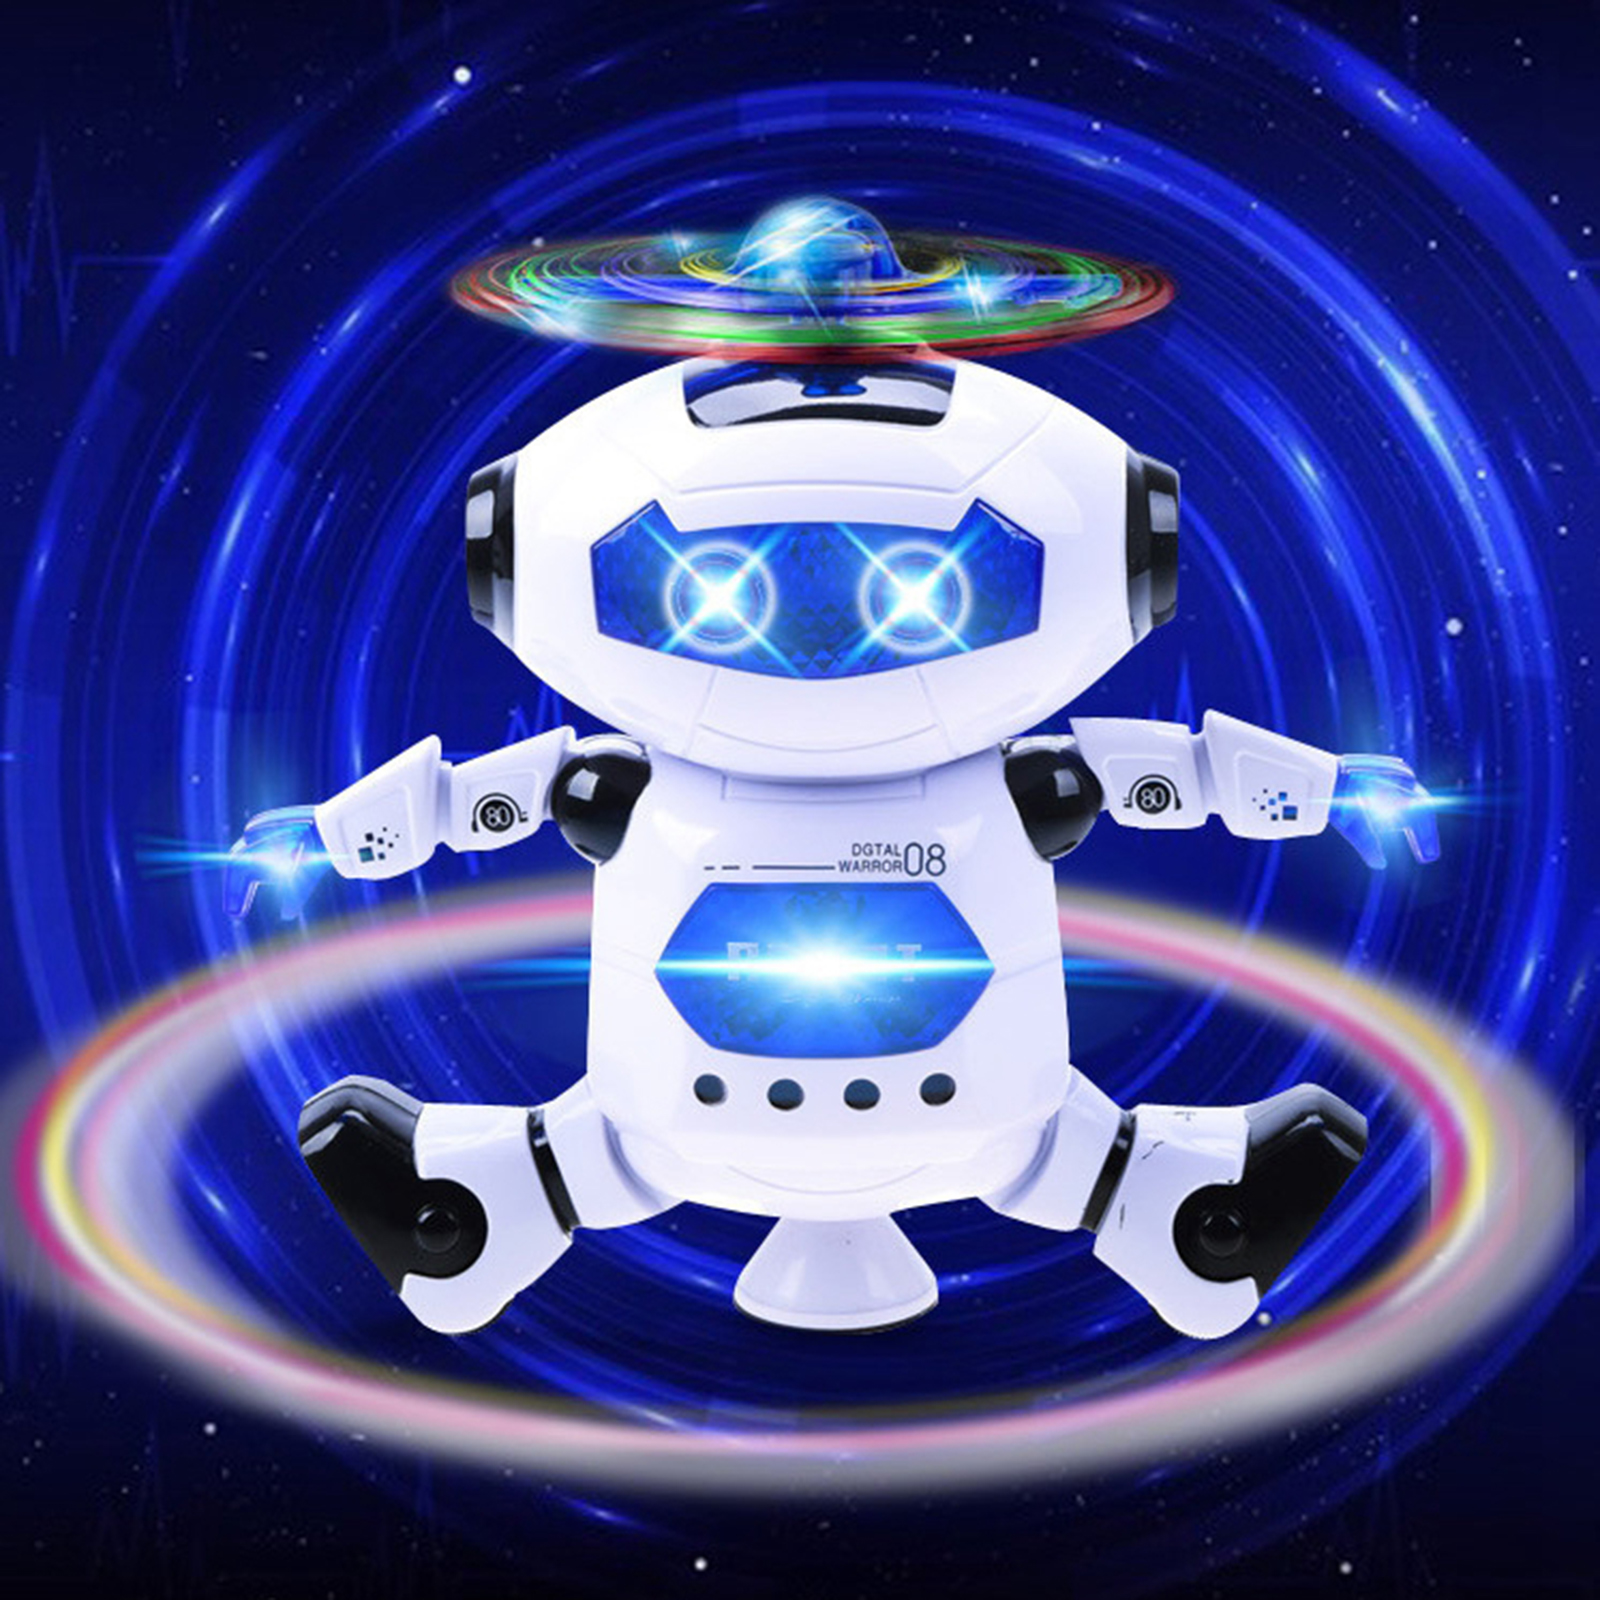 Creative Robot Toy Electronic Walking Dancing Robot Toys with Music Lightening for Kids